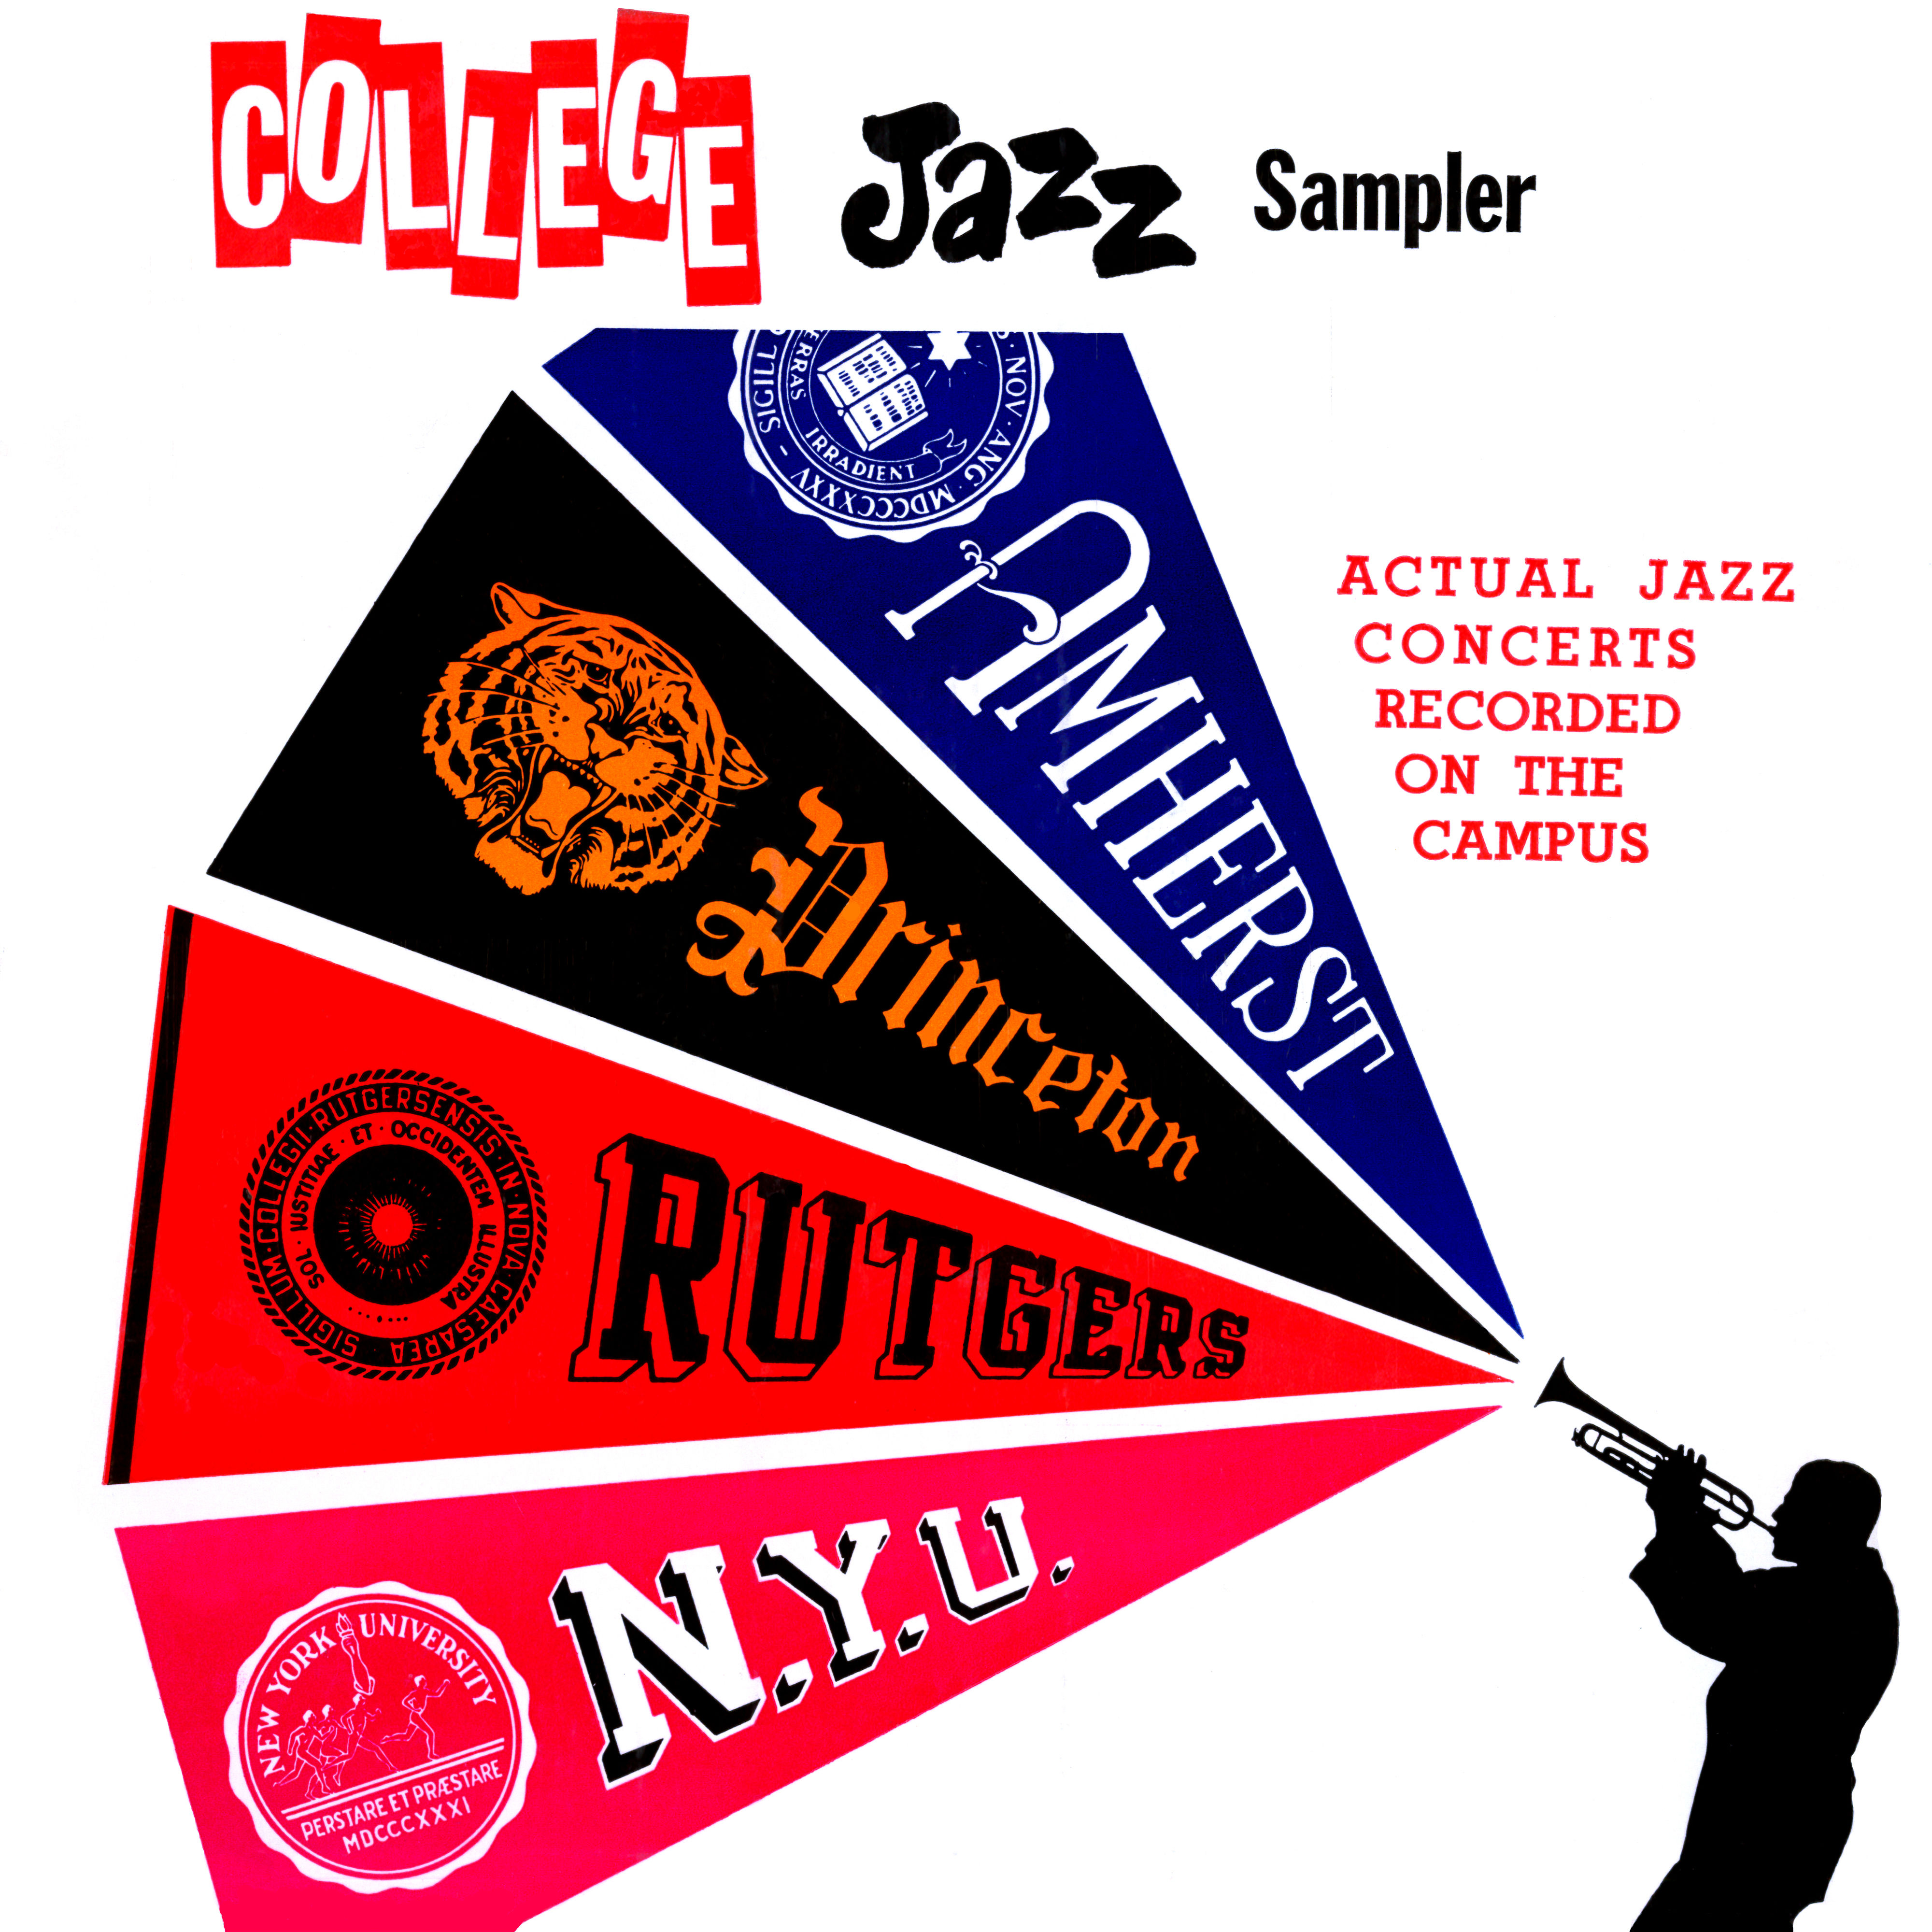 Billy Butterfield – College Jazz Sampler: Actual Jazz Concerts Recorded on the Campus (1955/2021) [FLAC 24bit/96kHz]